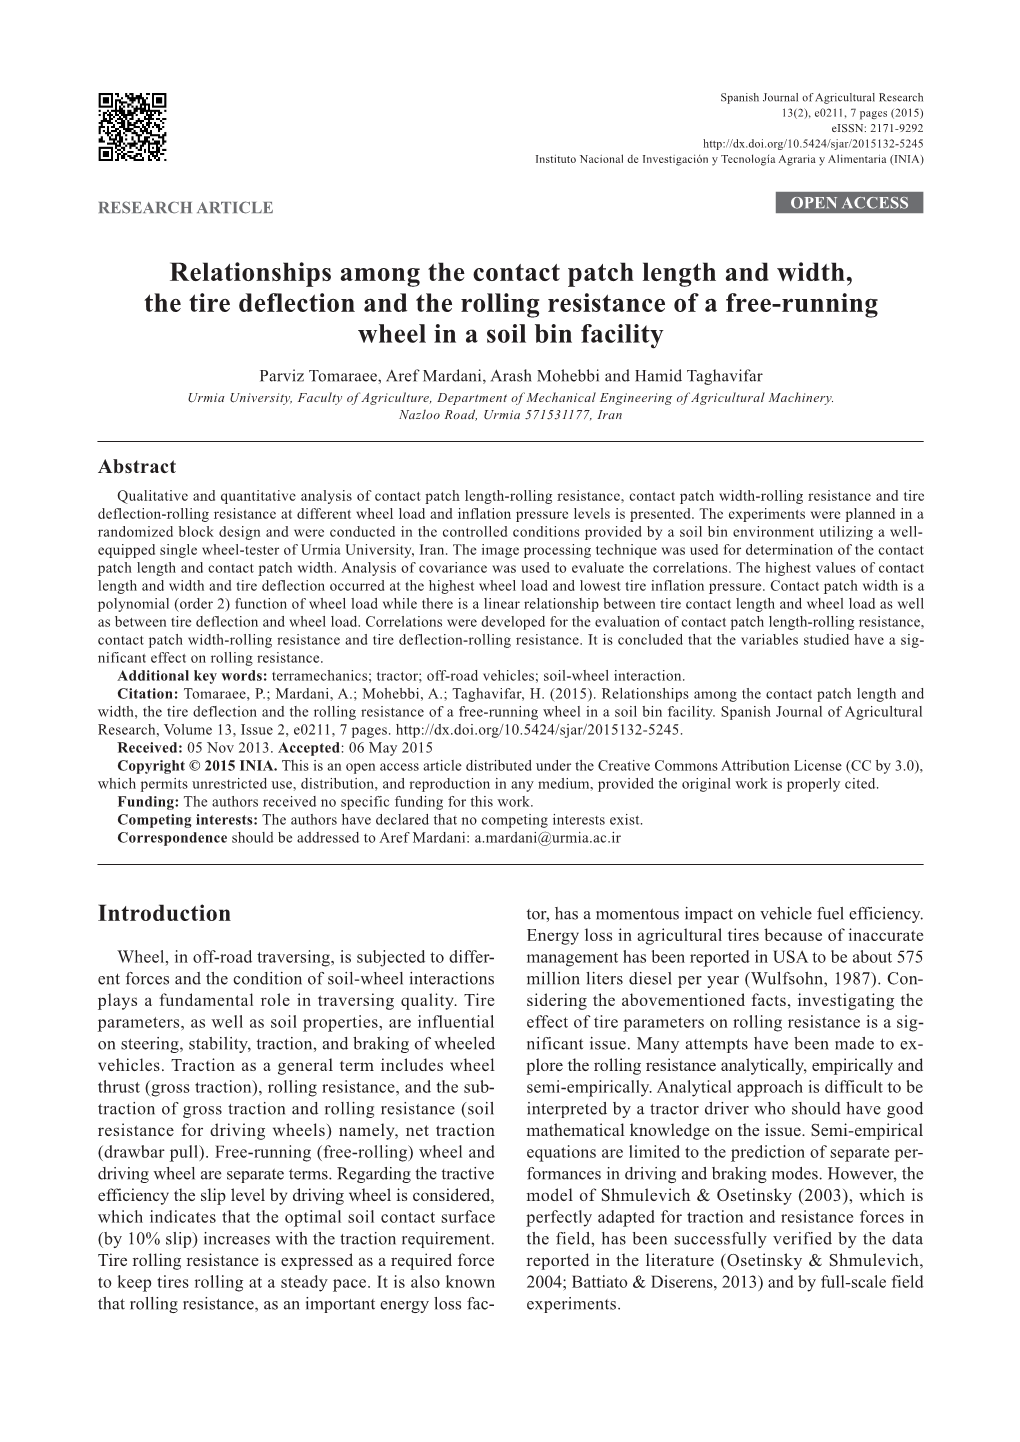 Relationships Among the Contact Patch Length and Width, the Tire Deflection and the Rolling Resistance of a Free-Running Wheel in a Soil Bin Facility